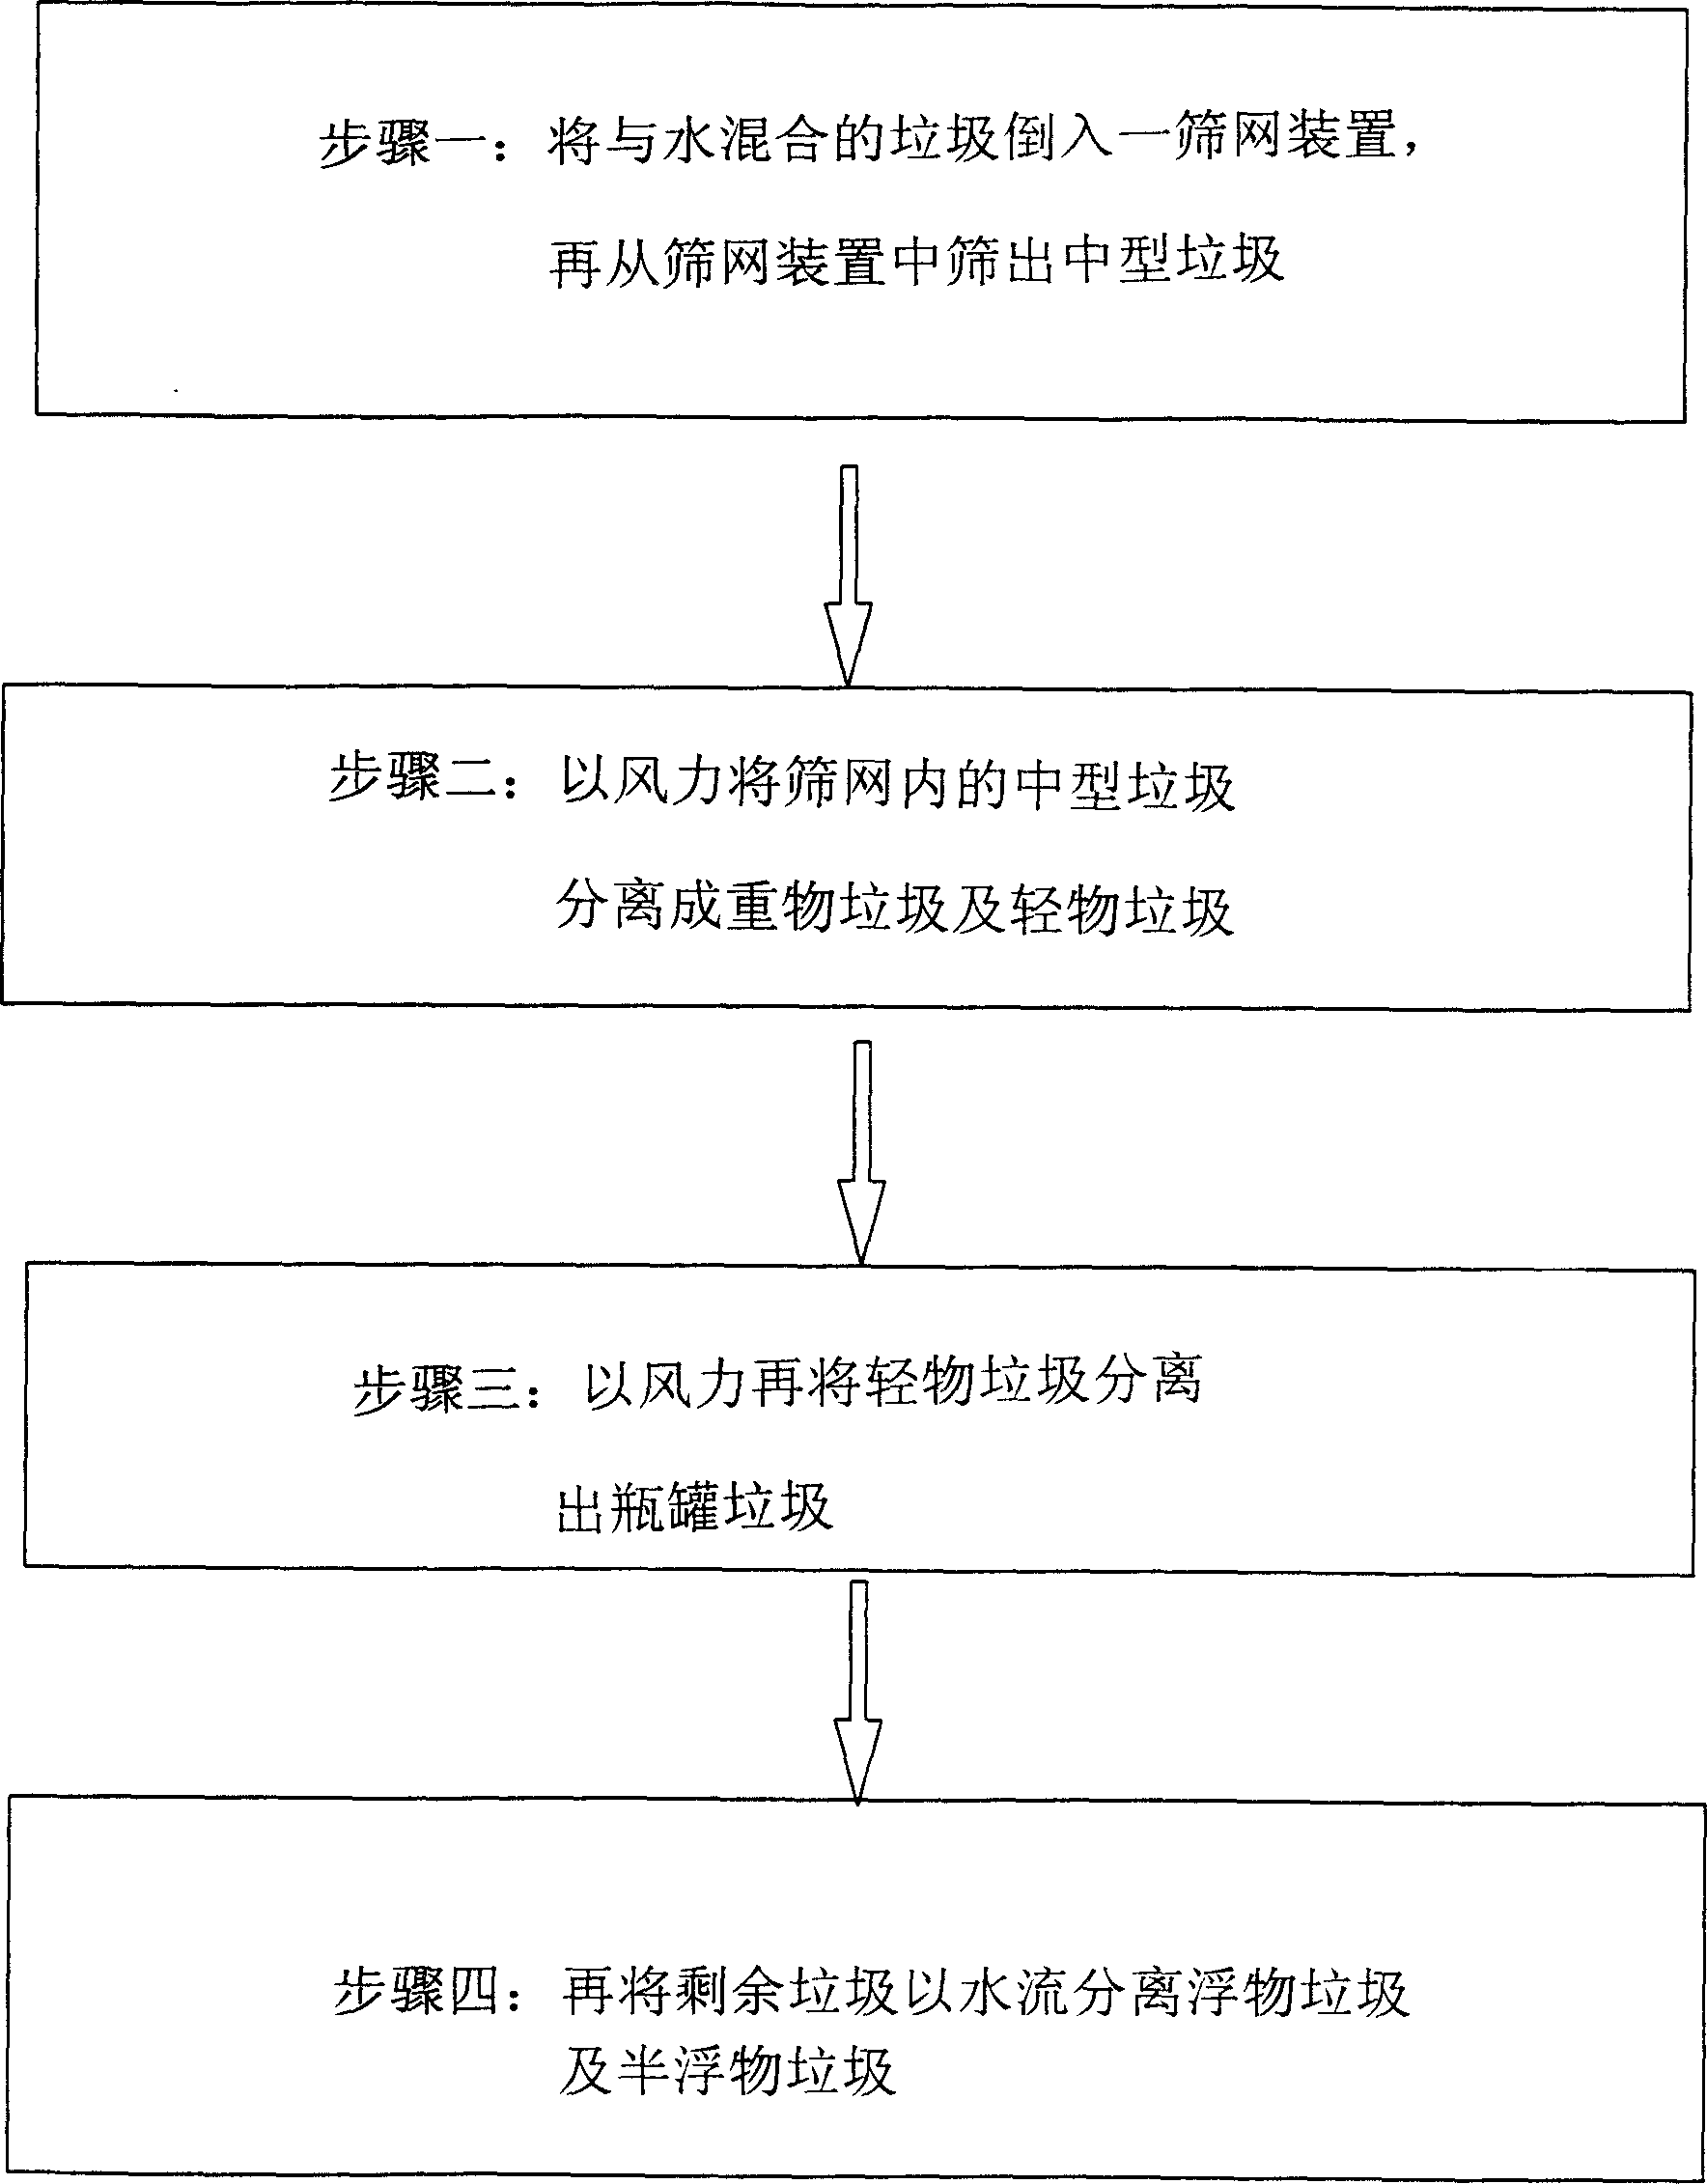 Method and device for separate collecting middle sized garbage